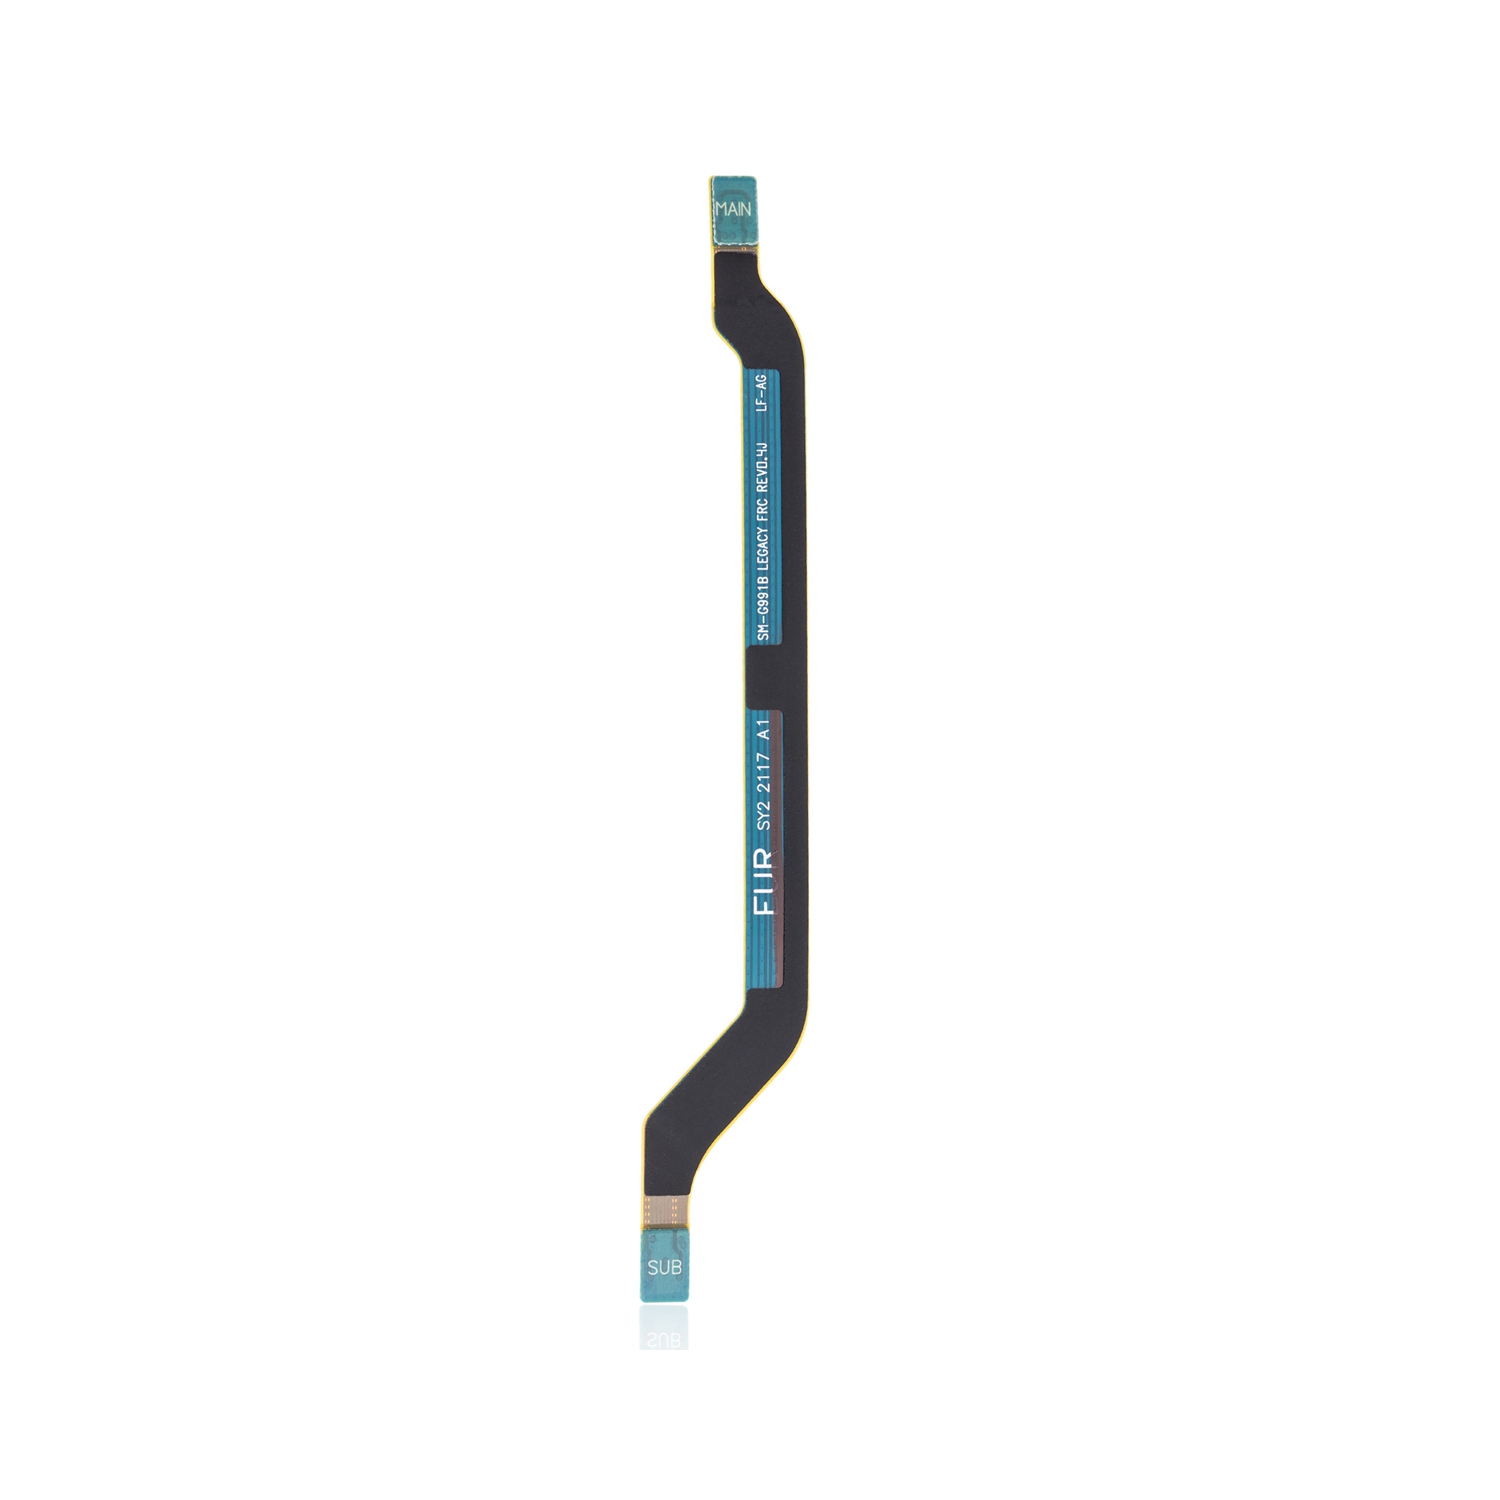 Replacement Antenna Connecting Cable For Samsung Galaxy S21 5G (SM-G991W) International Version